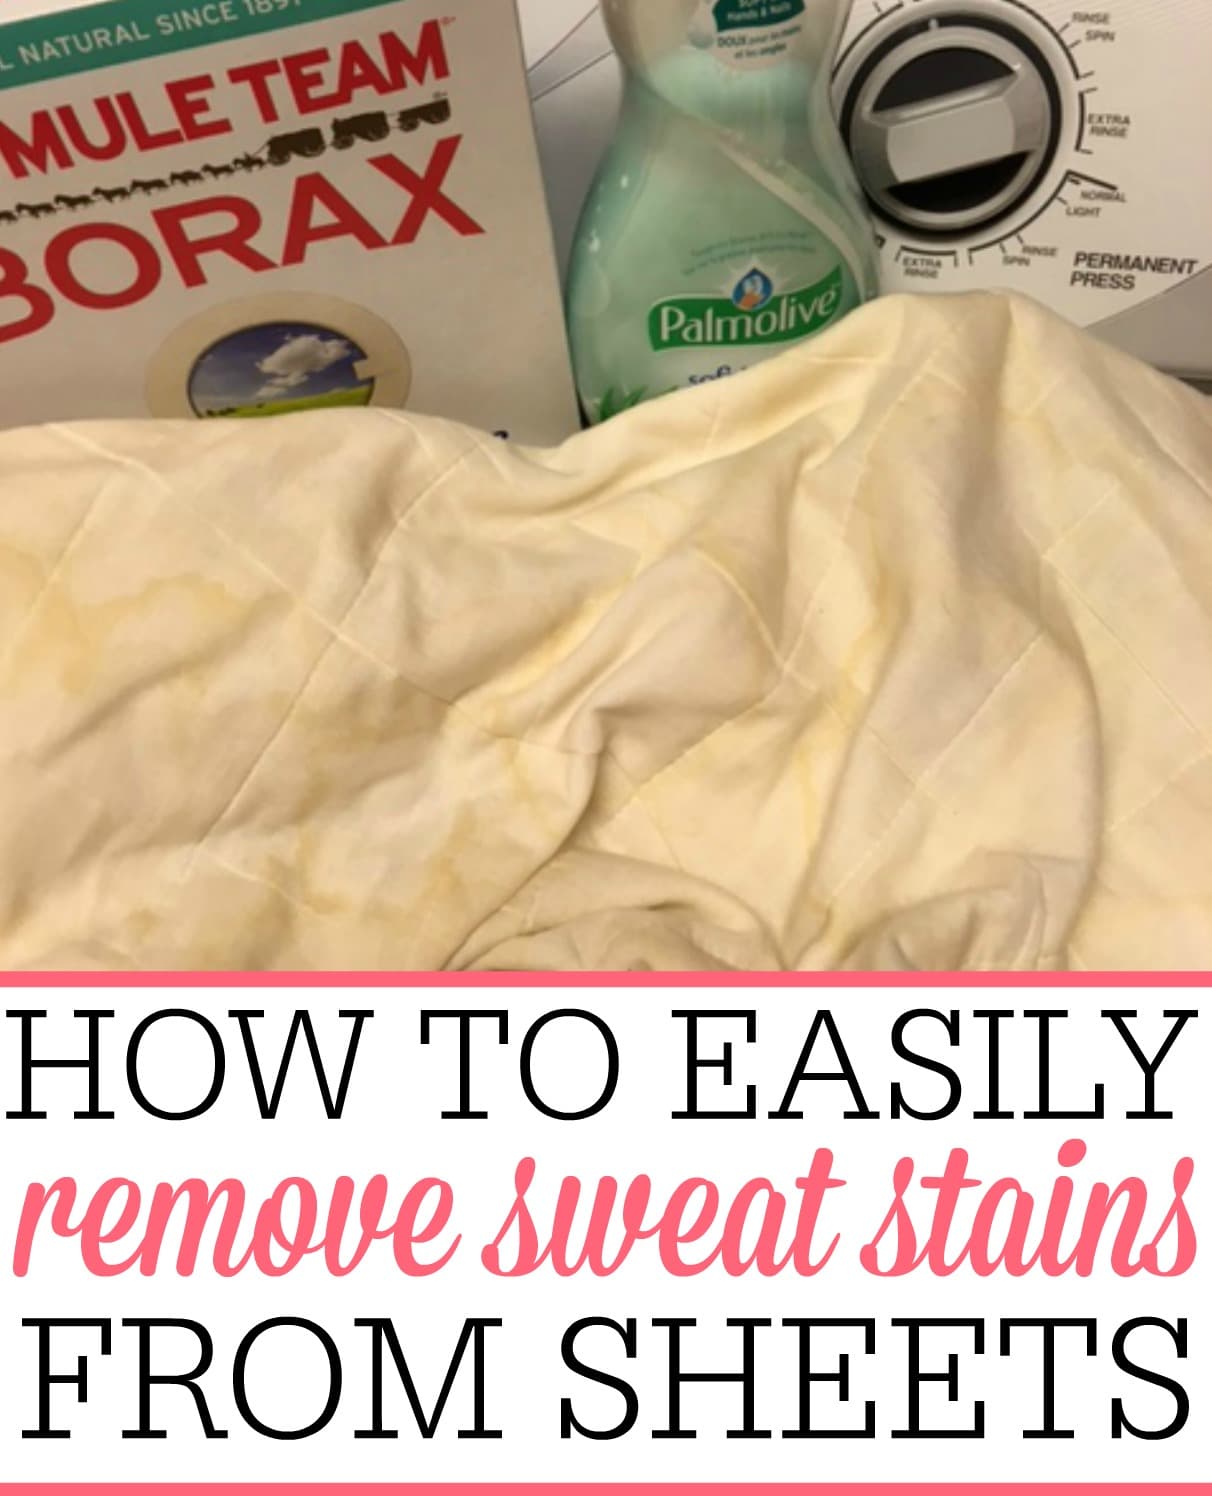 how to easily remove sweat stains